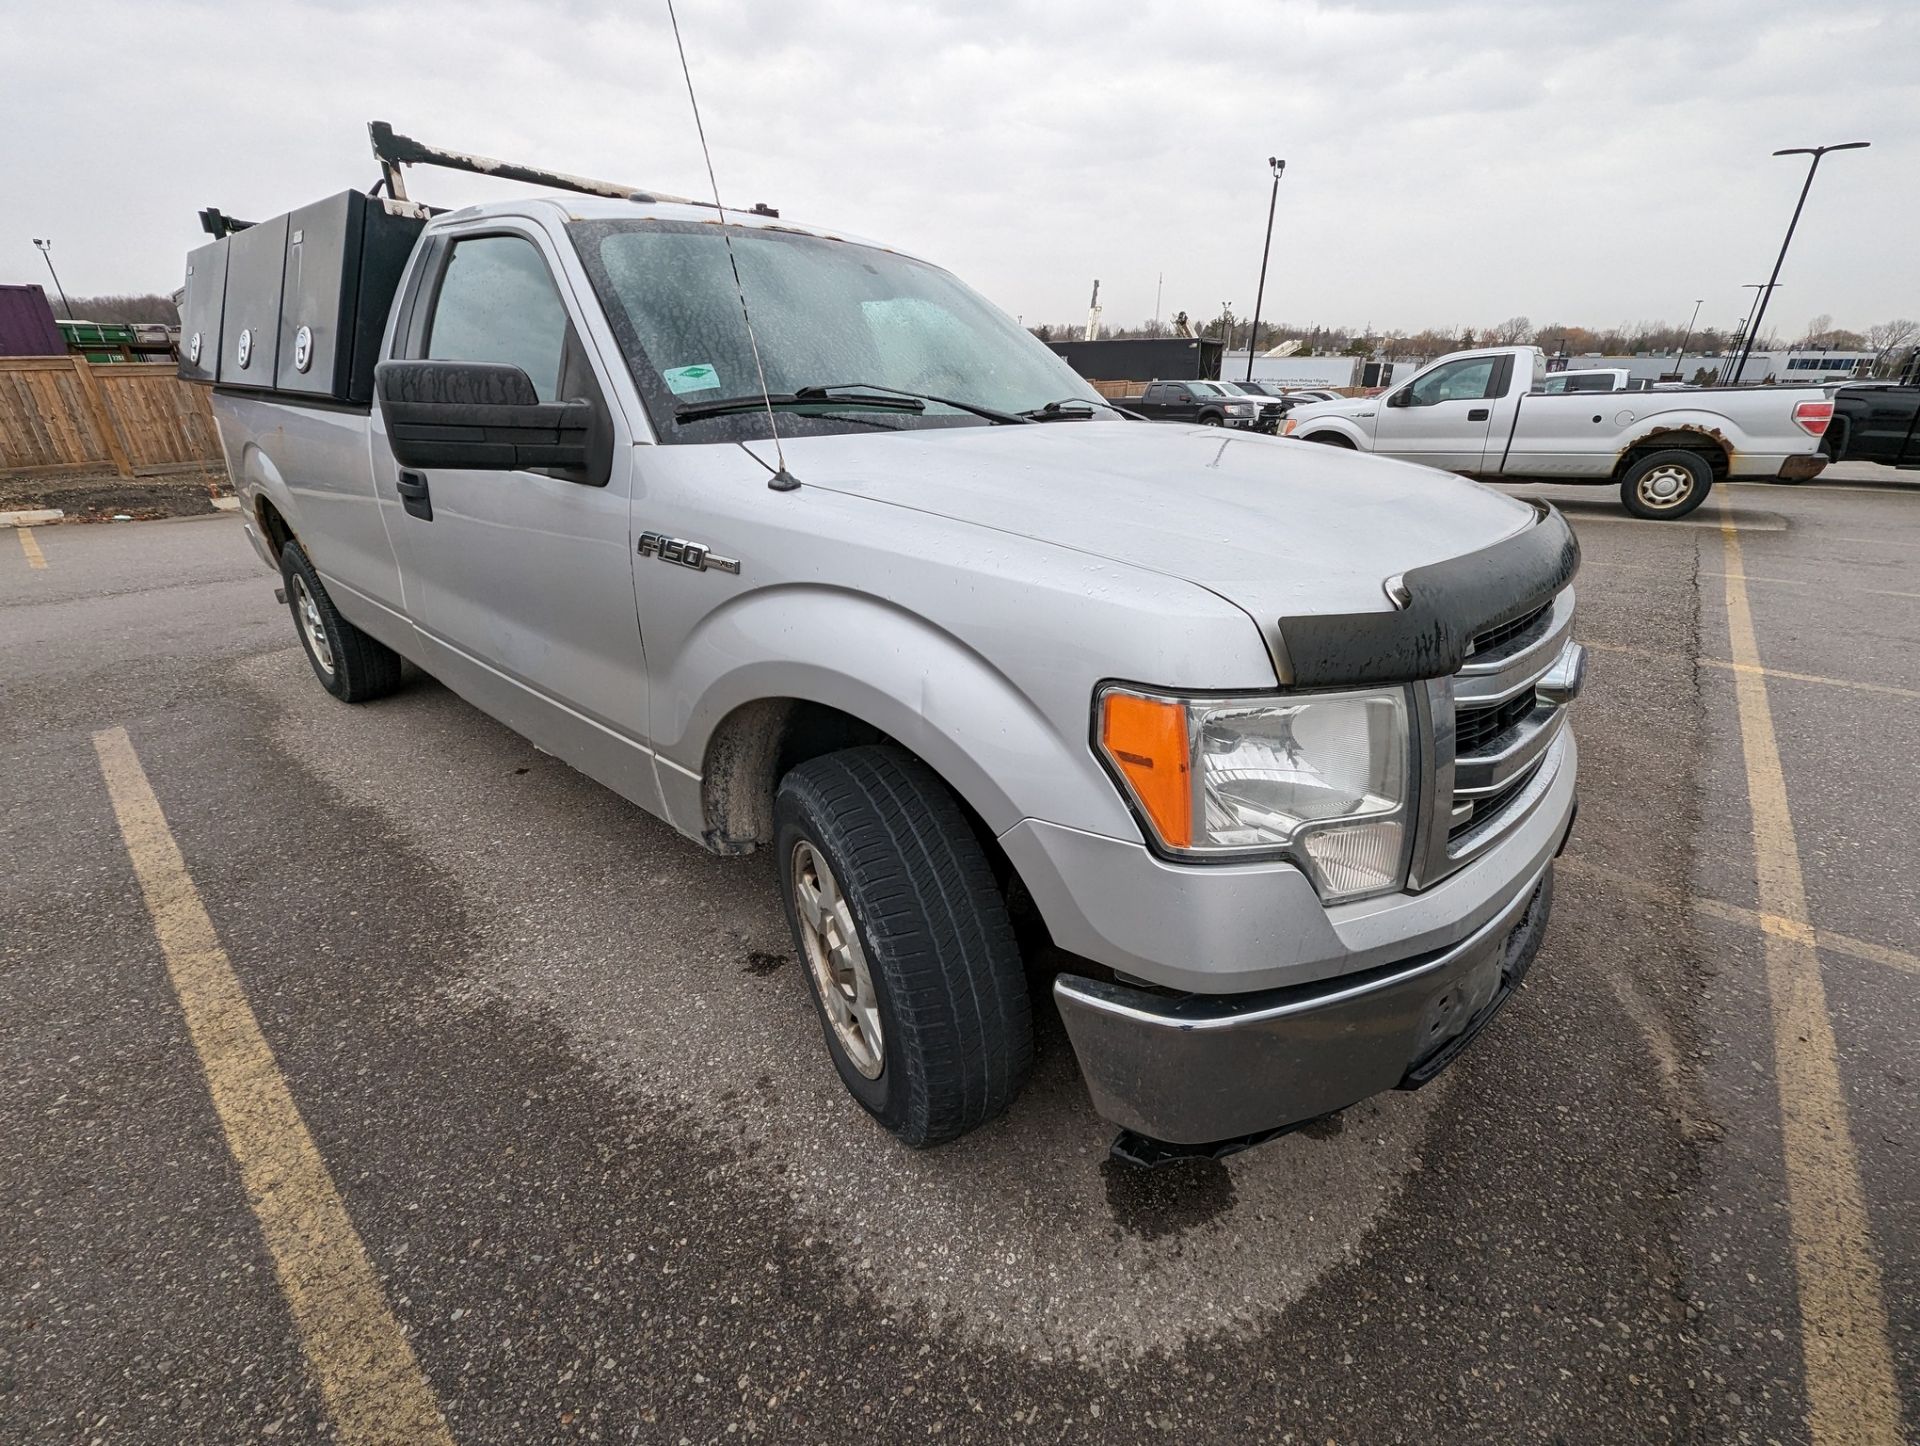 2013 FORD F150 XLT PICKUP TRUCK, VIN# 1FTNF1CF2DKE53797, APPROX. 411,982KMS (NO BLACK TOOL BOXES) - Image 3 of 12